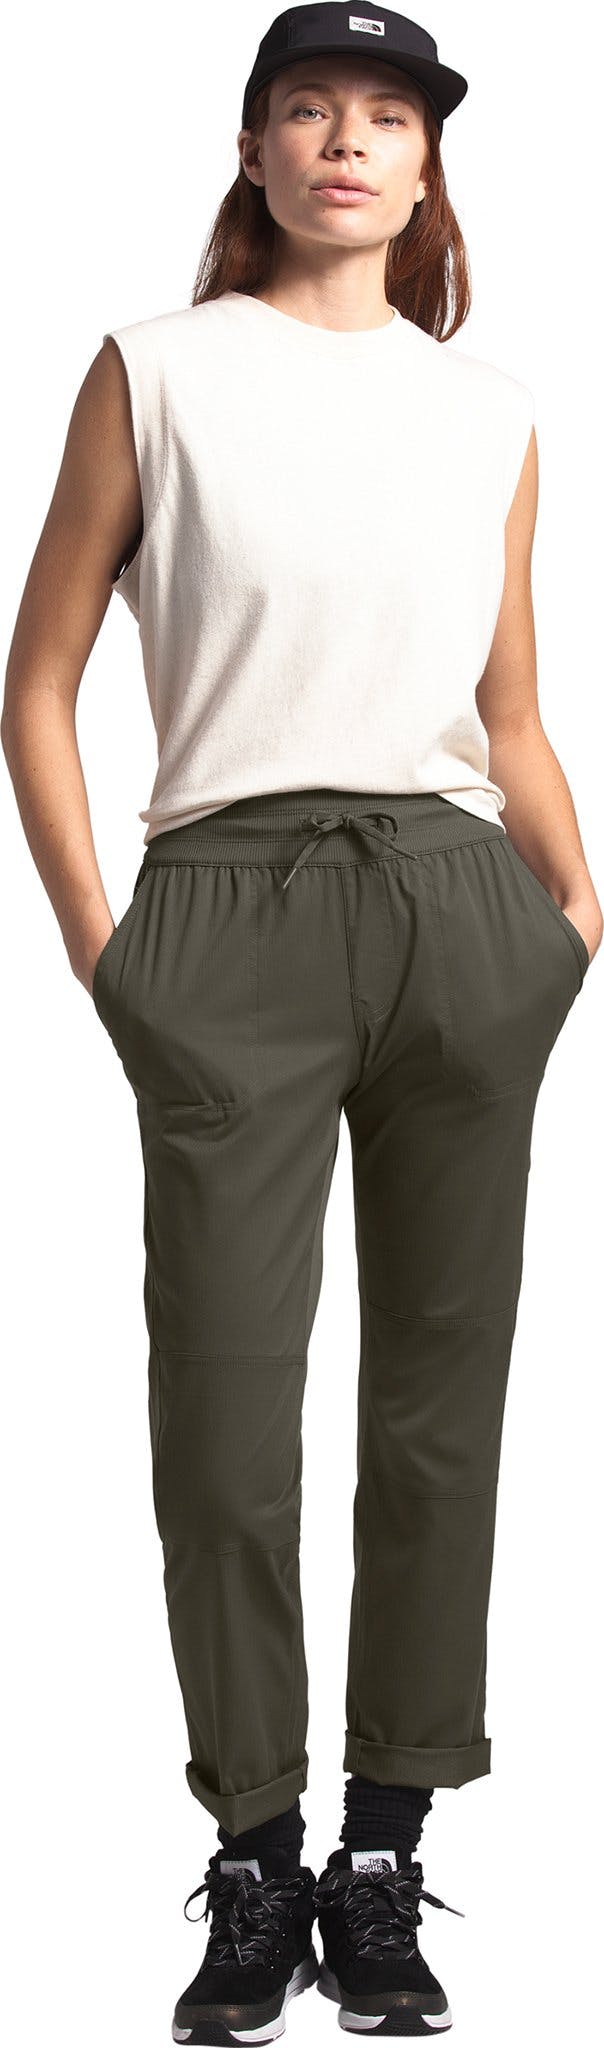 Product image for Aphrodite Motion Pants - Women’s